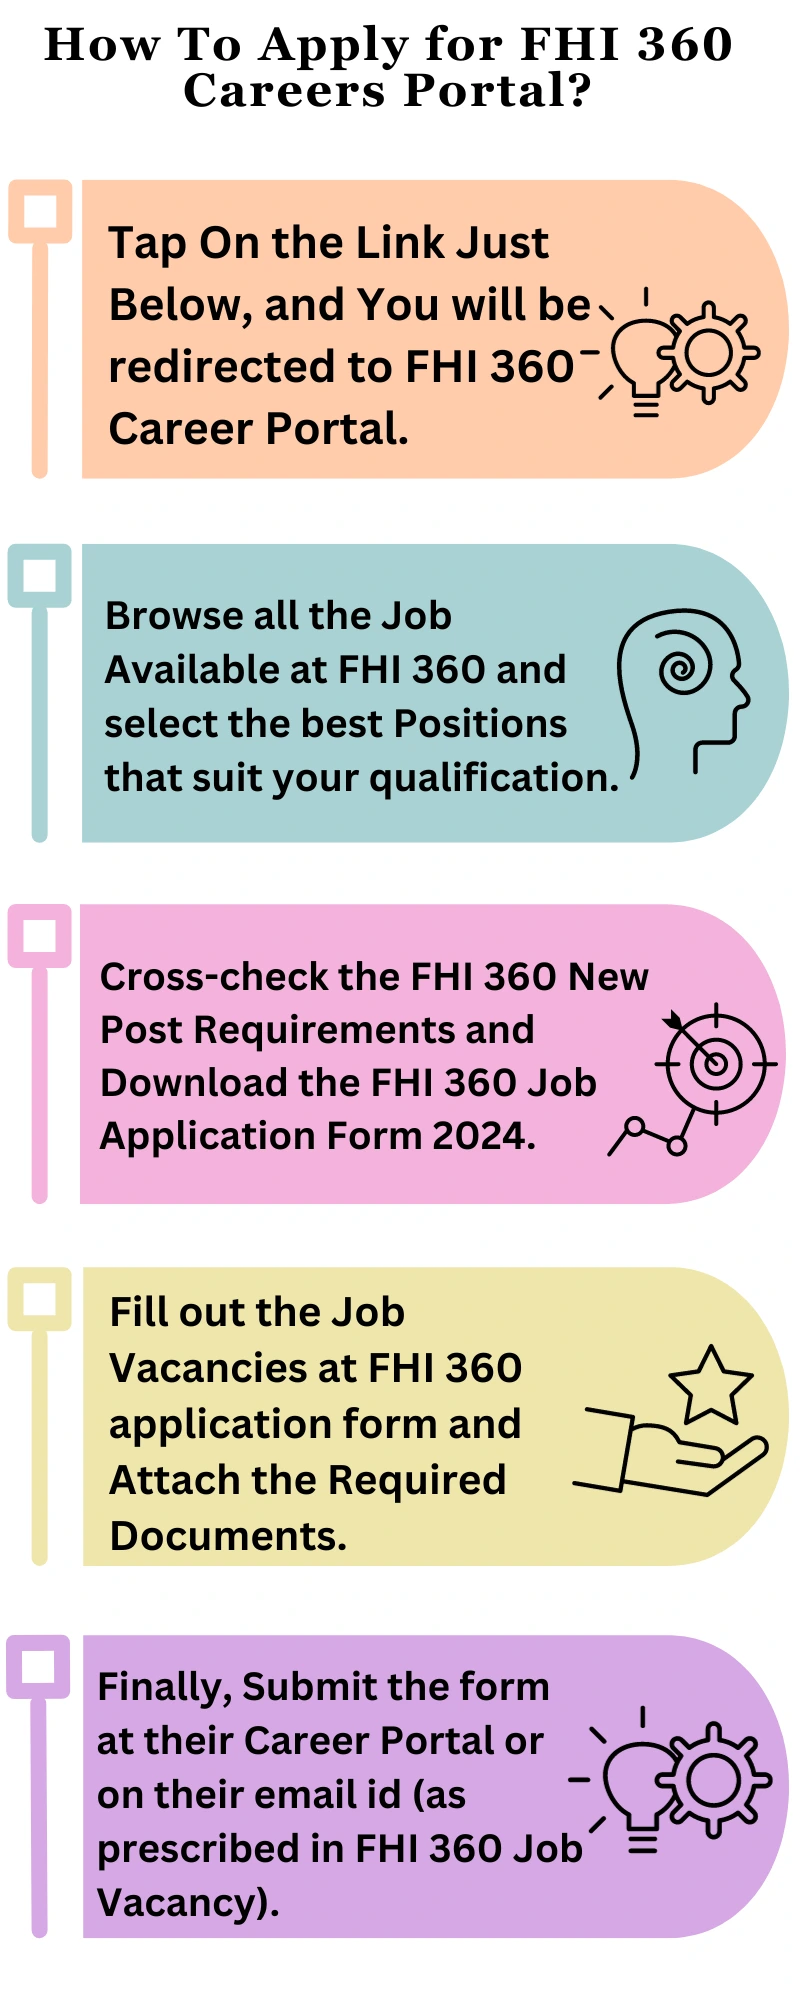 How To Apply for FHI 360 Careers Portal?